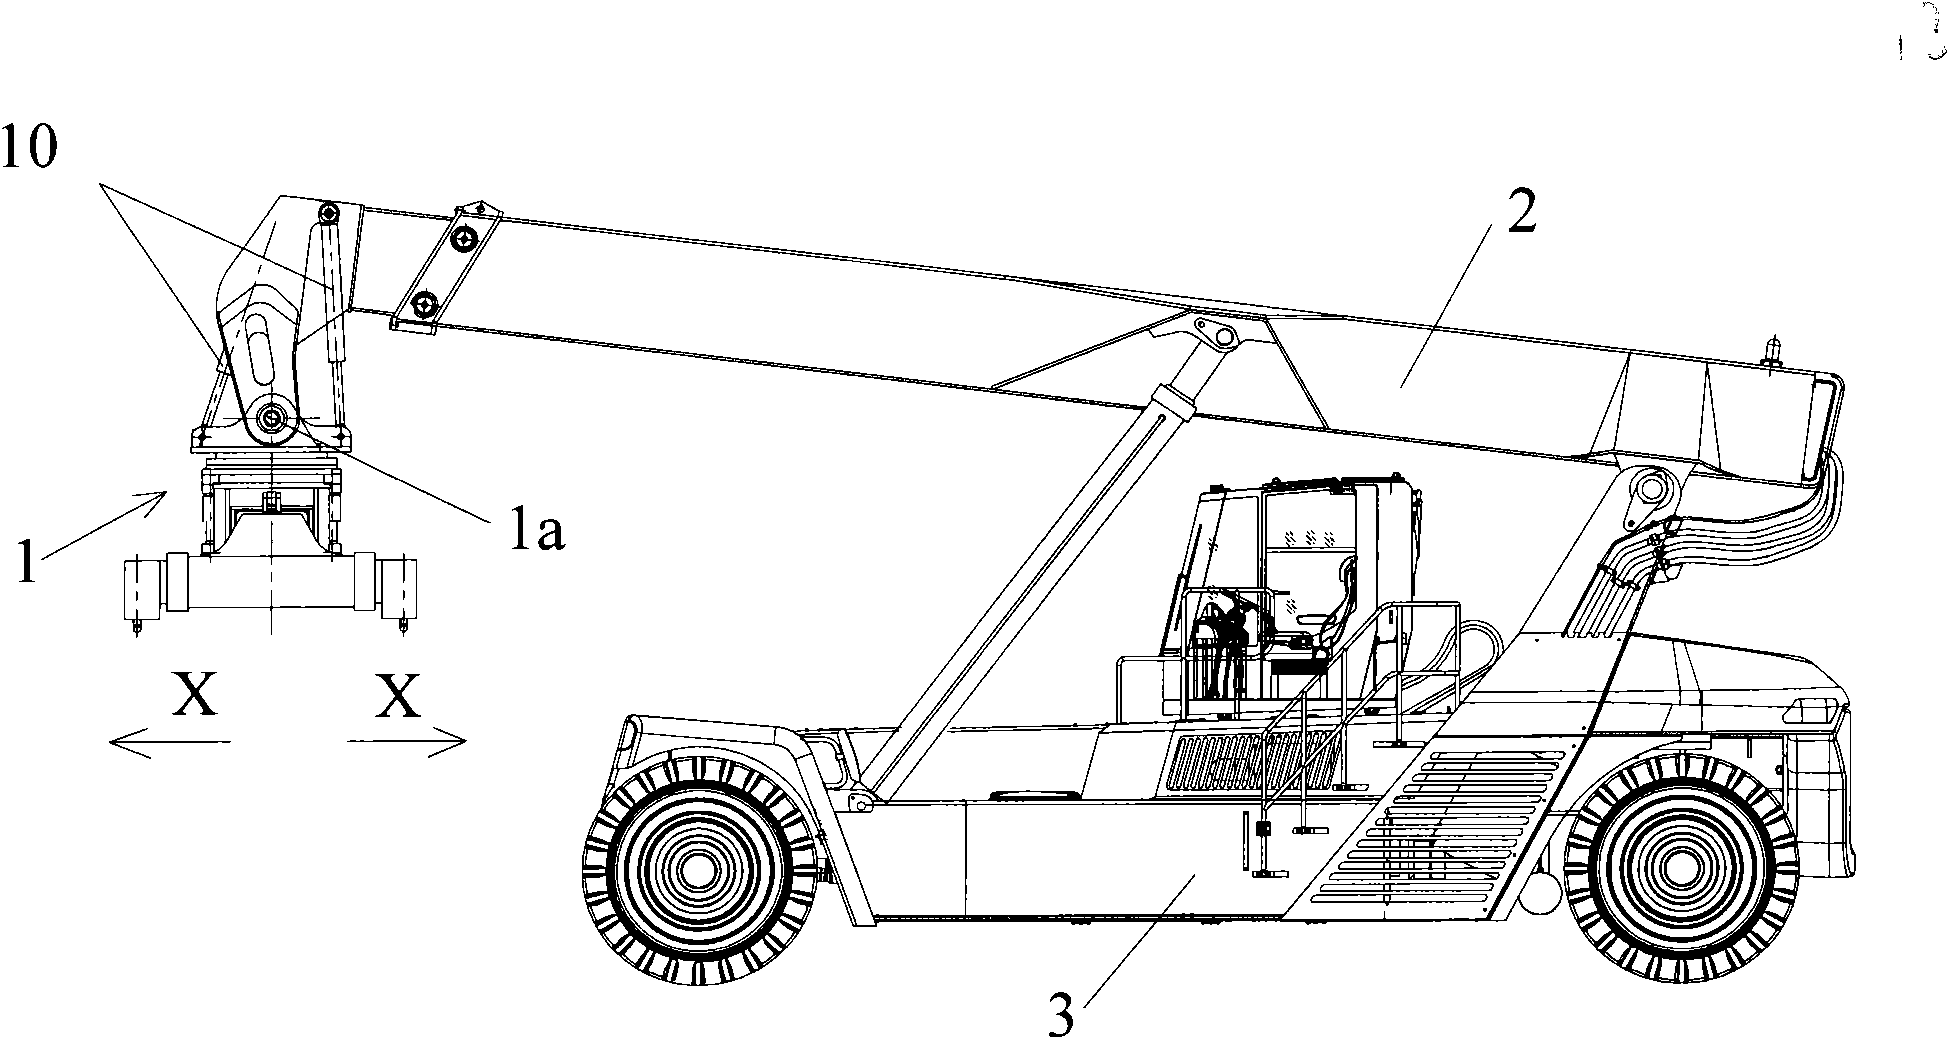 Lifting appliance and front handling mobile crane with same